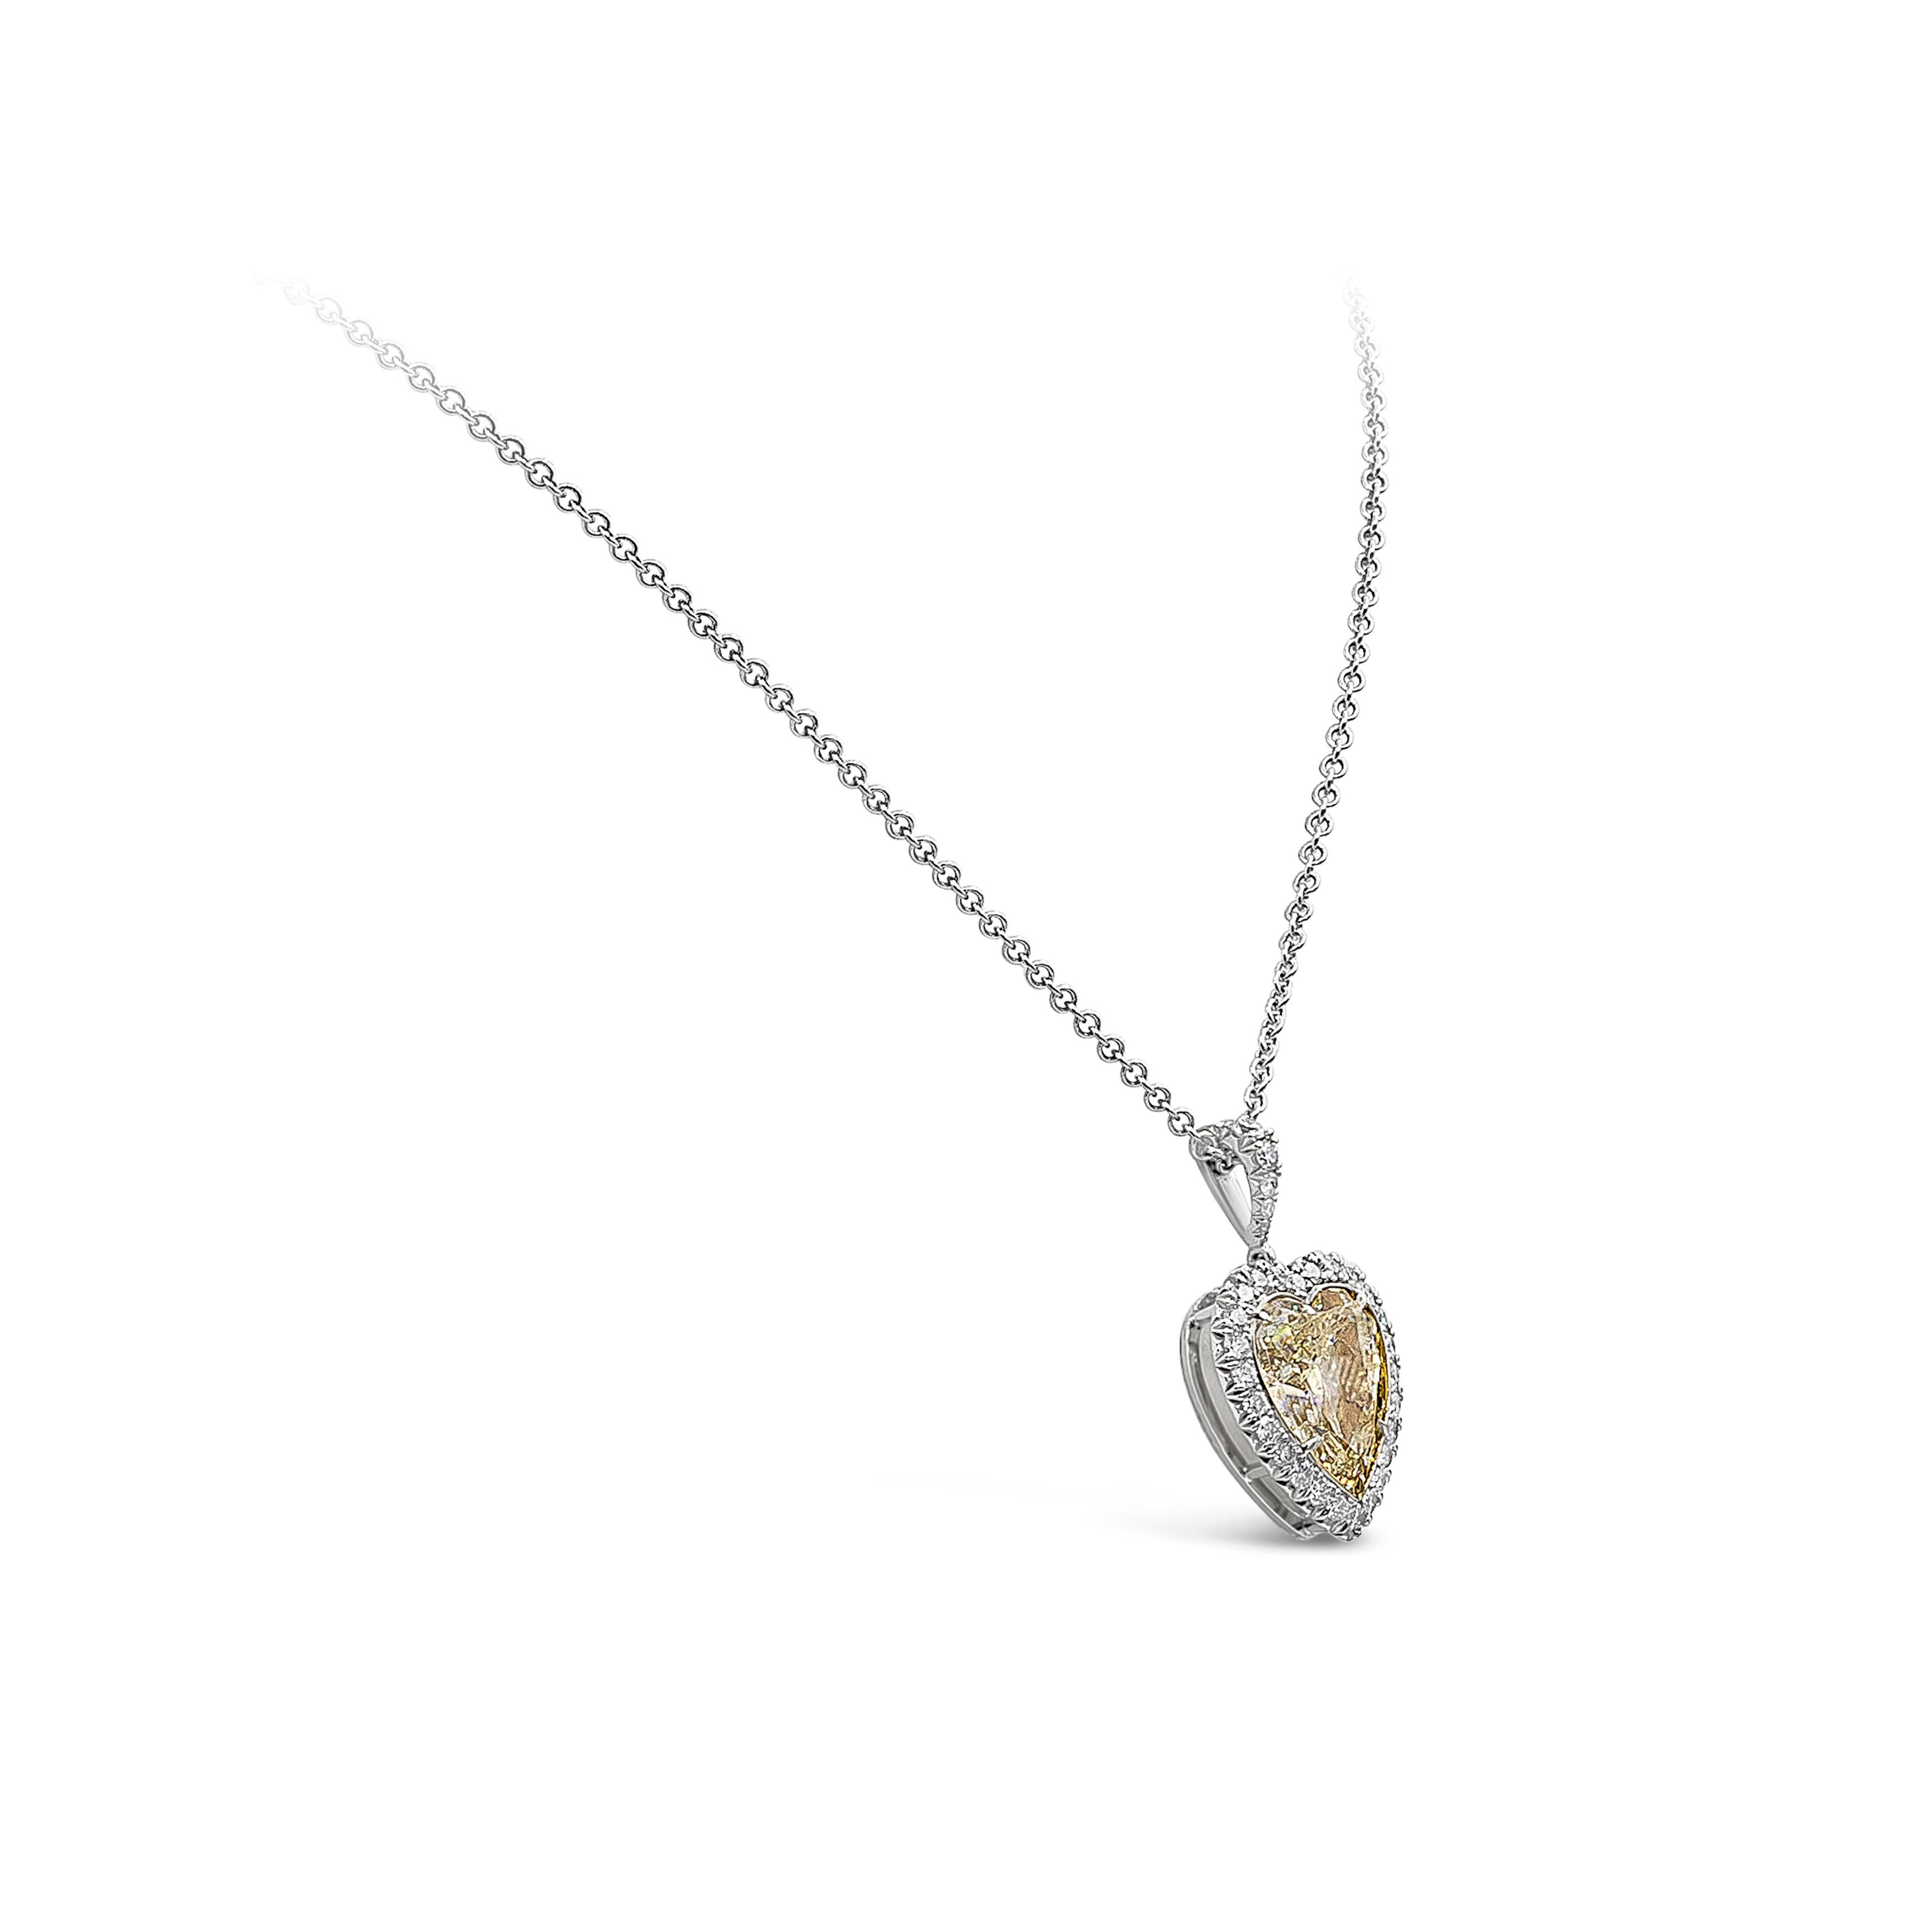 Well crafted and vibrant pendant necklace showcasing an 8.07 carats yellow diamond certified by GIA as Y-Z color, set in a five prong 18k yellow gold setting. Surrounded by a single row of round brilliant diamonds weighing 0.62 carats total.